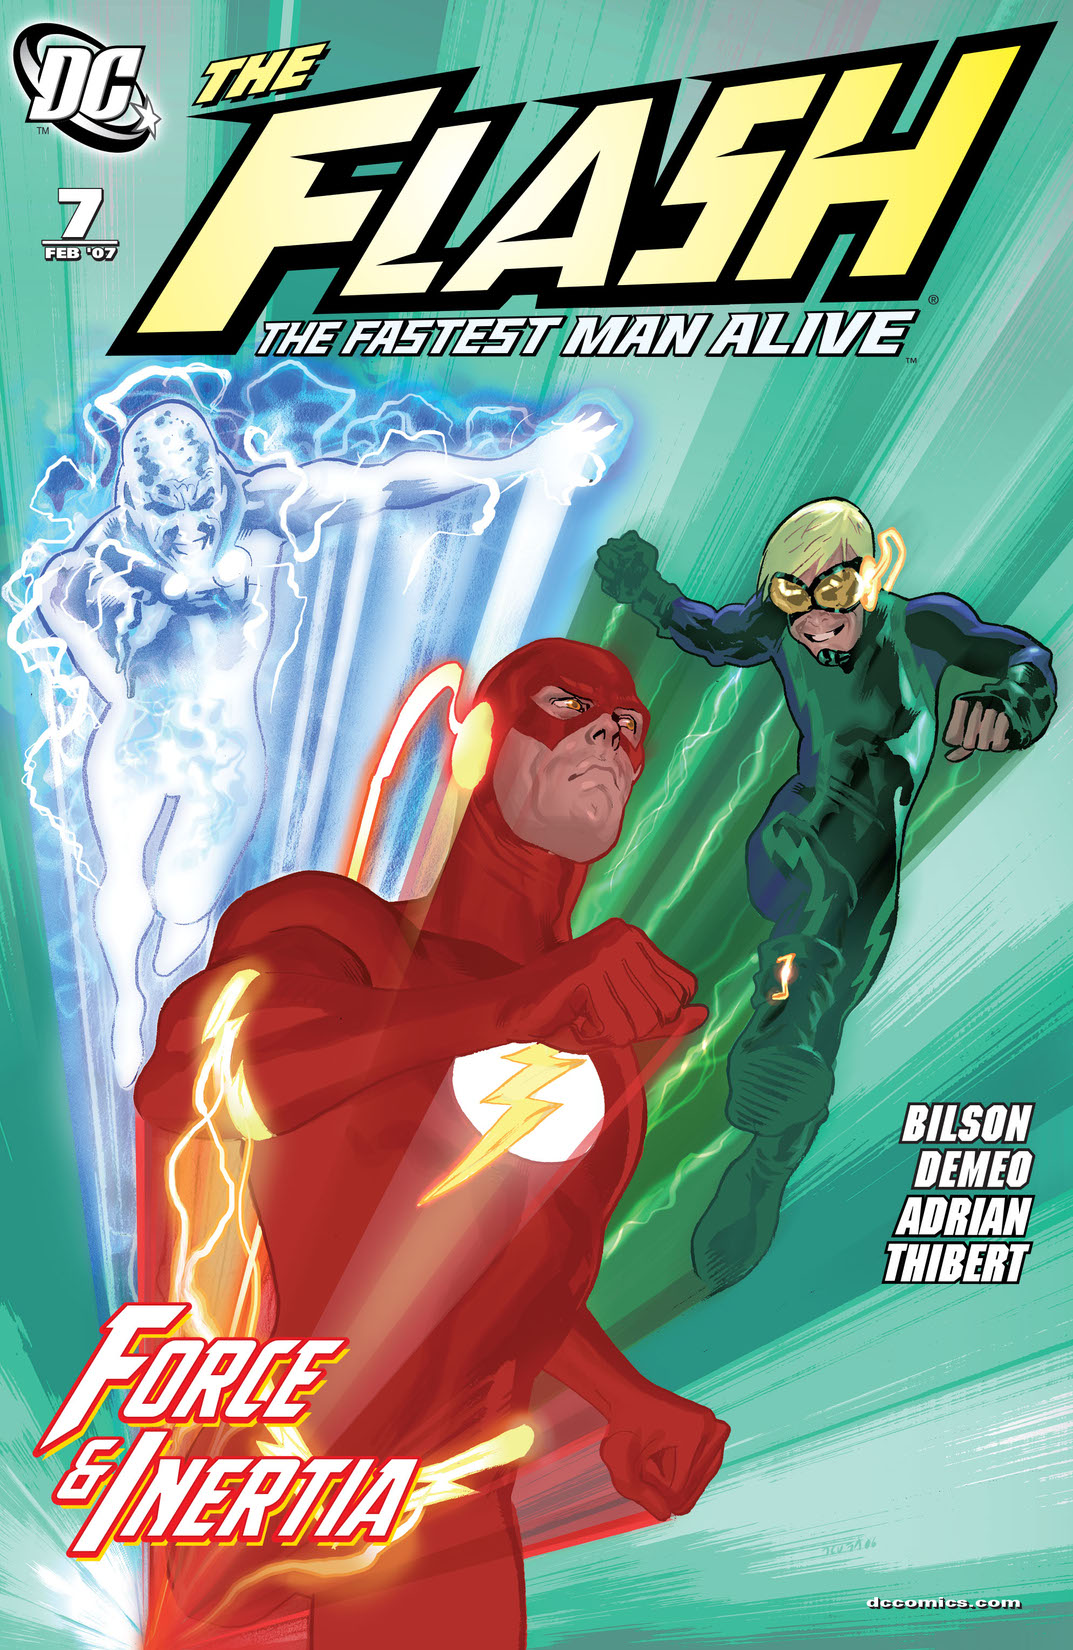 Flash: The Fastest Man Alive #7 preview images